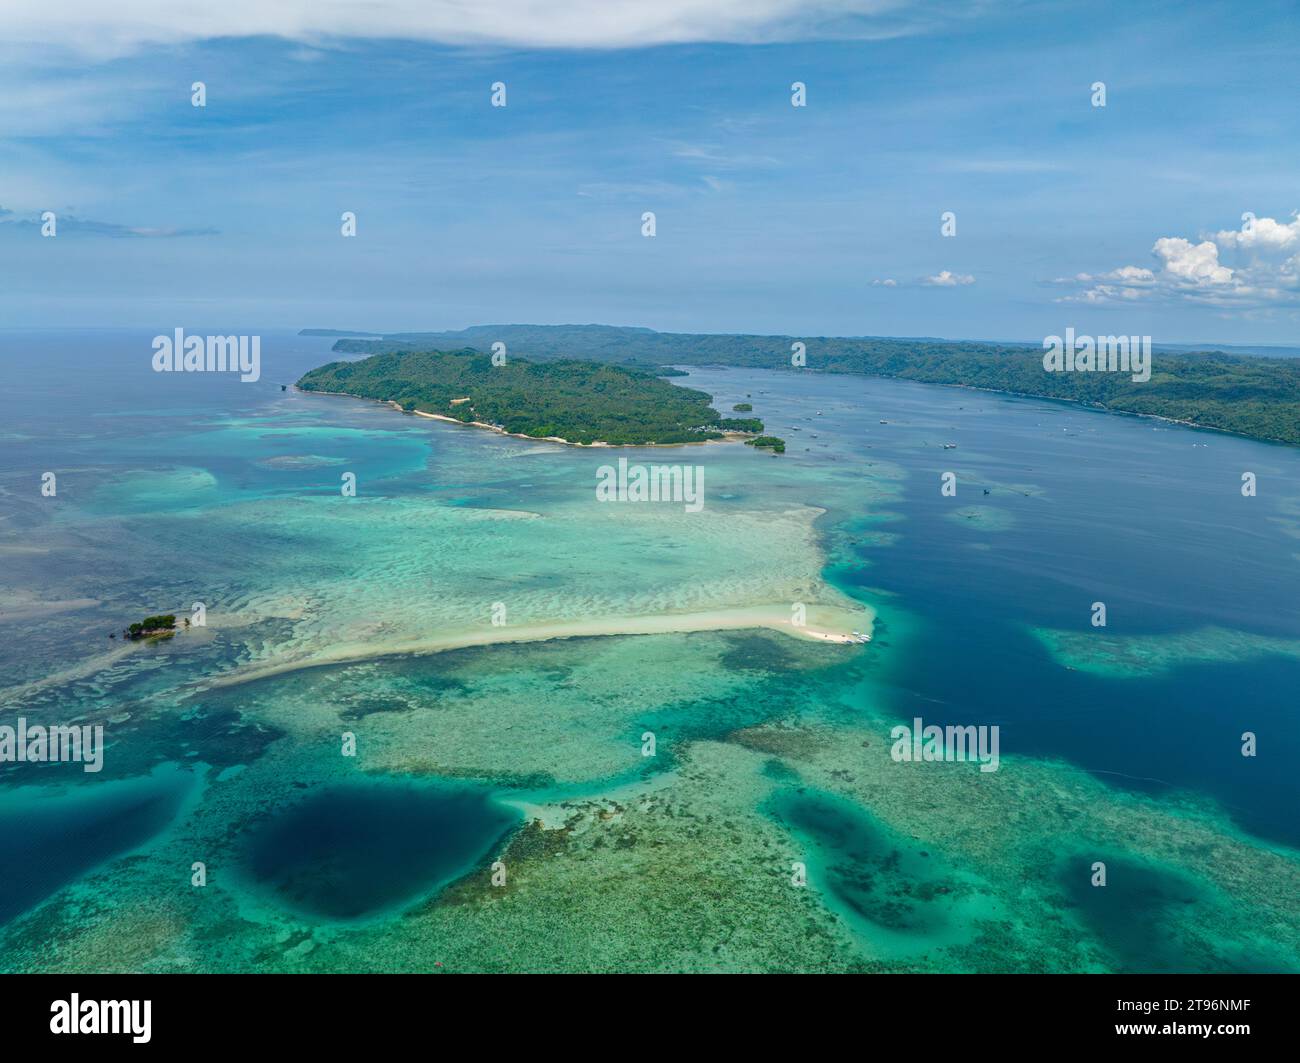 Tropical Island and sandbar surrounded by azure water and reefs. Barobo, Surigao del Sur. Philippines. Stock Photo